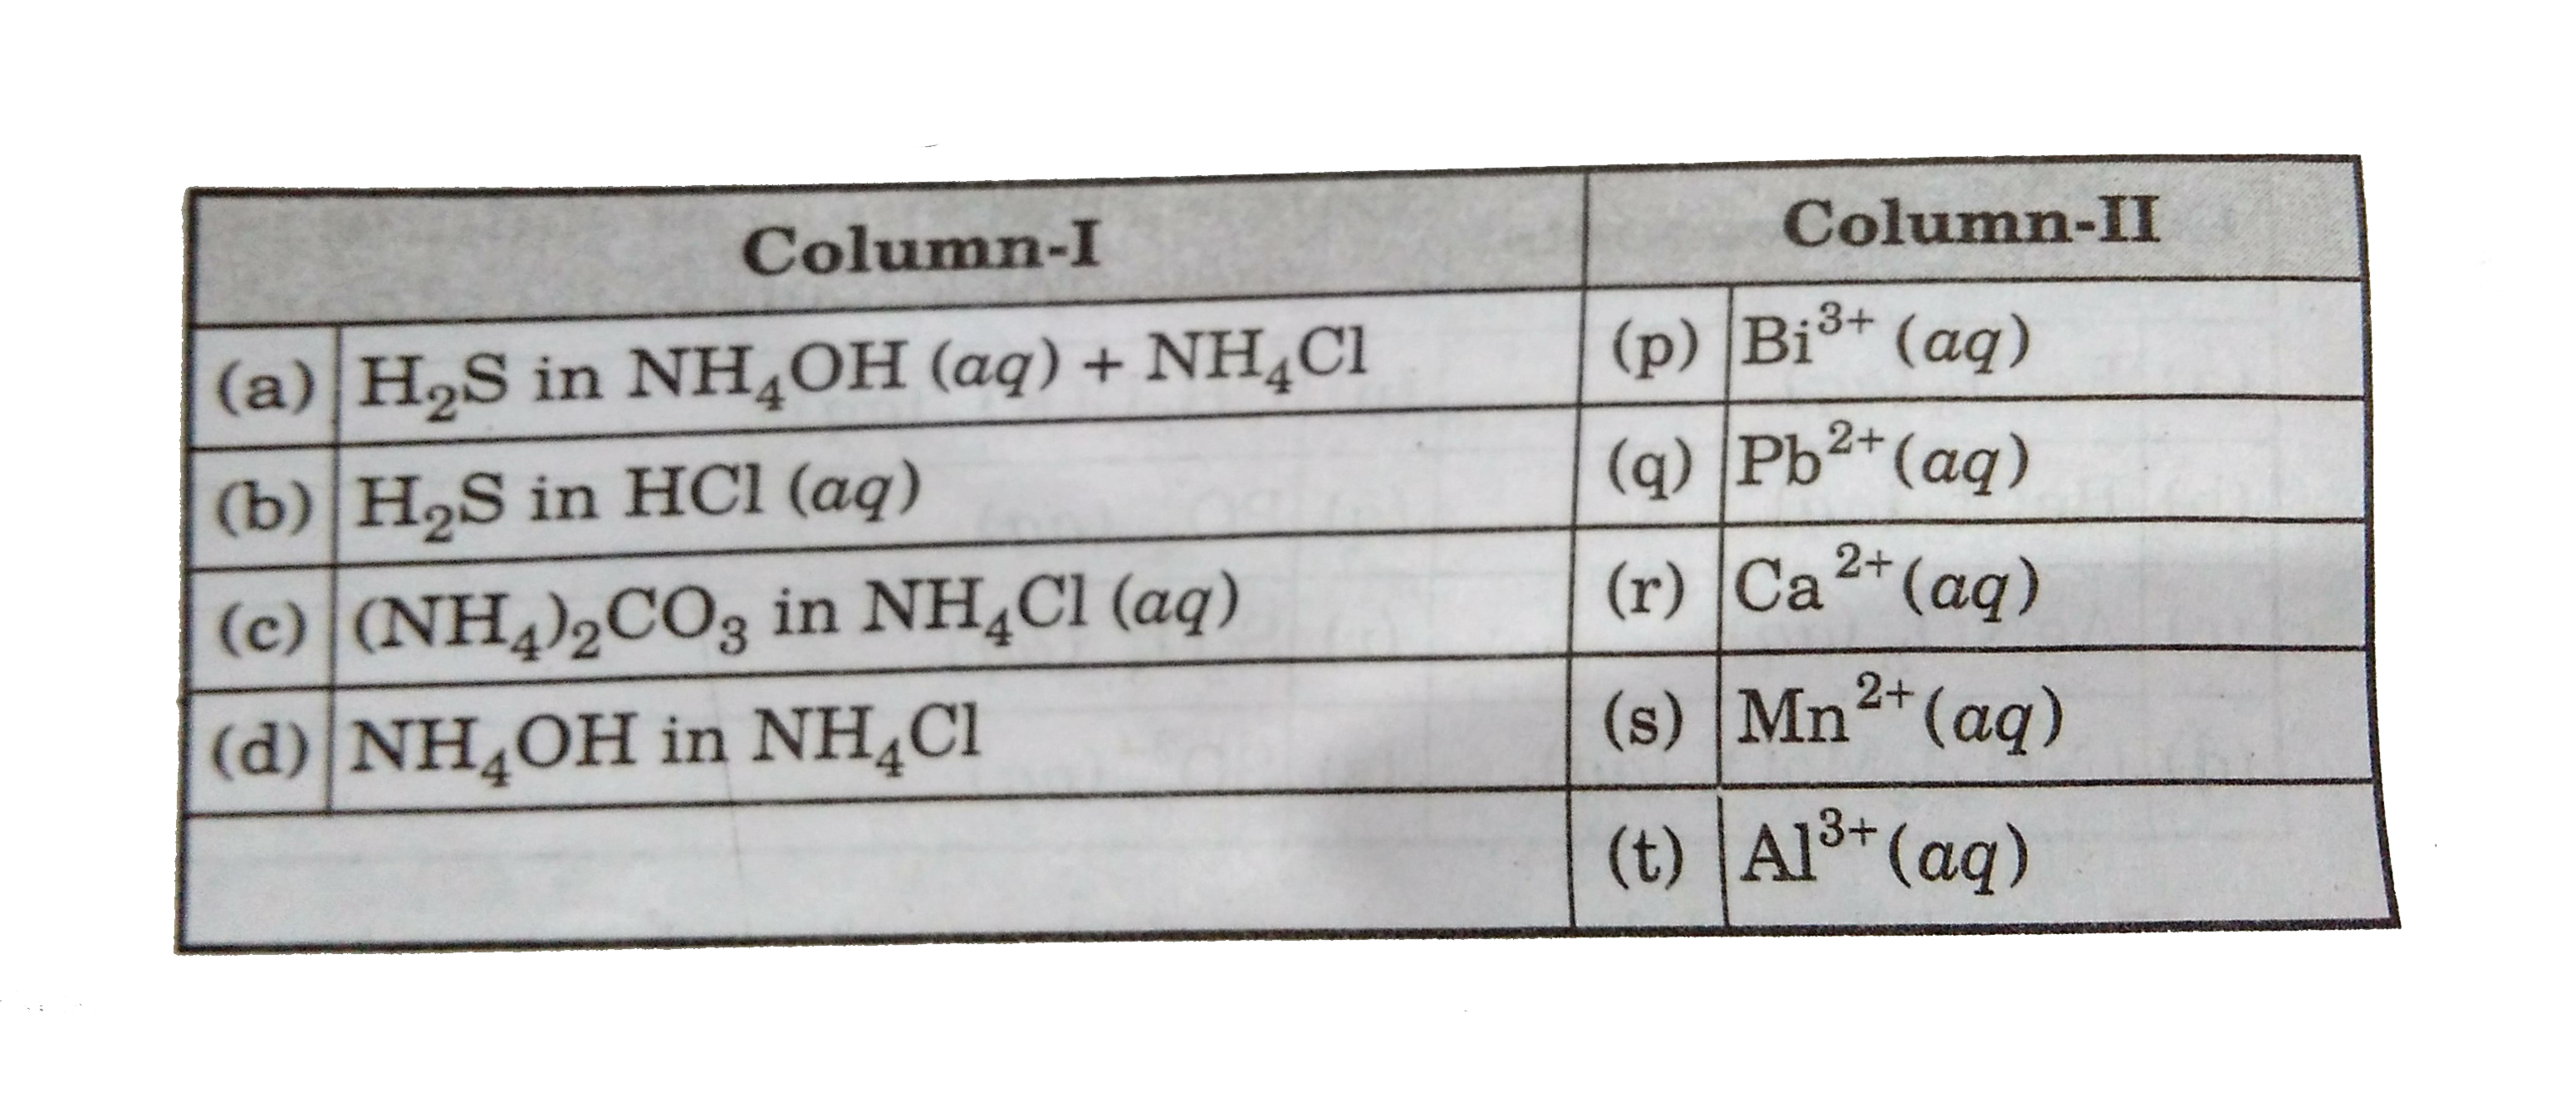 Column-I lists some of Group reagents which give characteristic  colout/precipitate mentioned cations in column-II. Match each entry of column-I with those given in column-II.